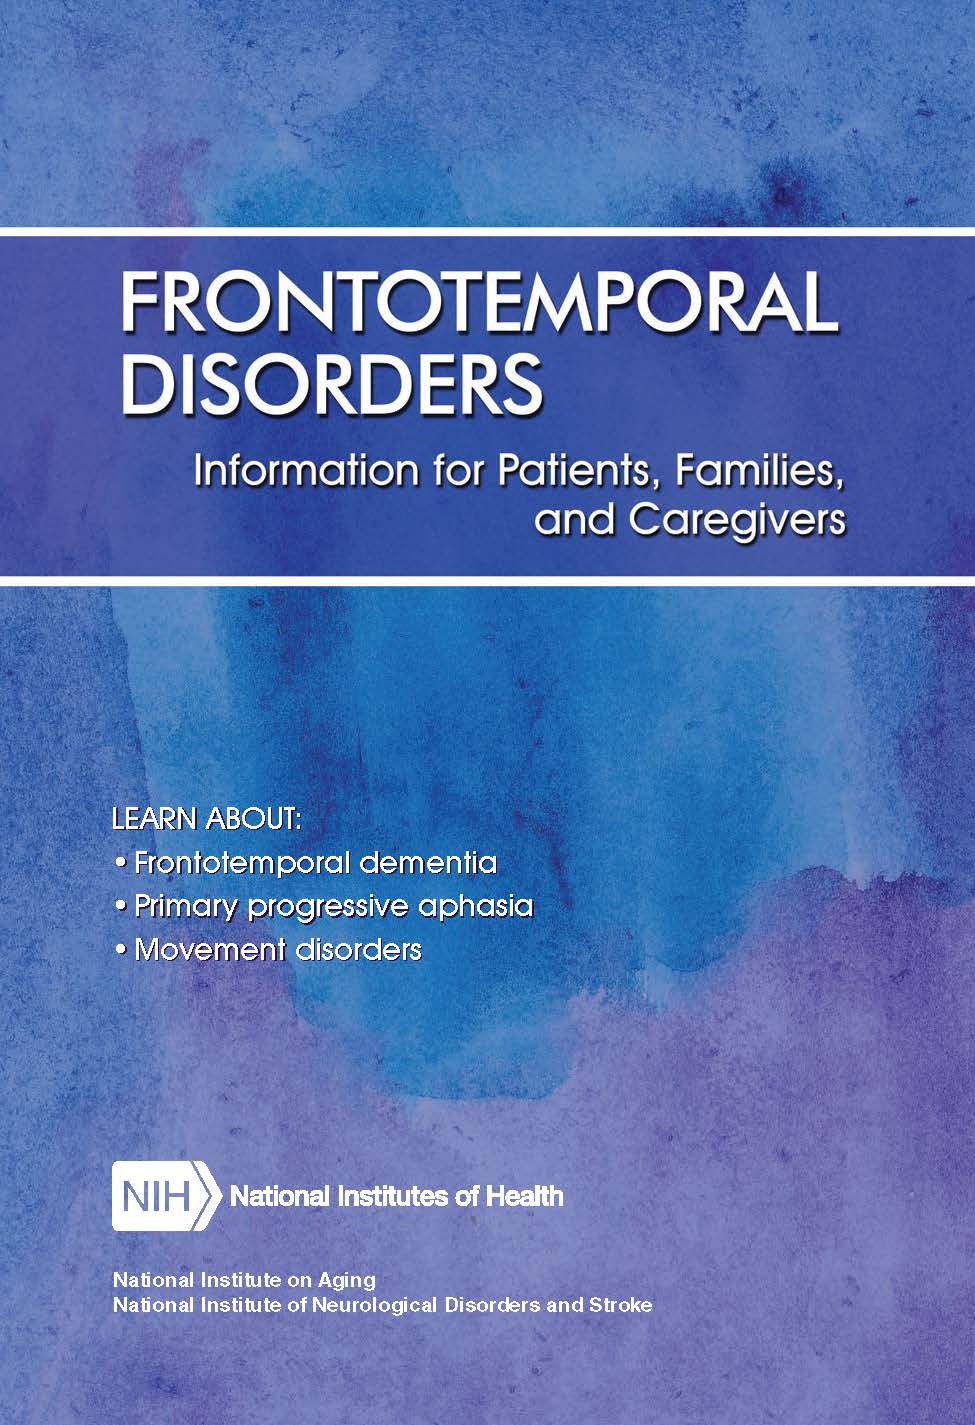 Frontotemporal Disorders: Hope Through Research